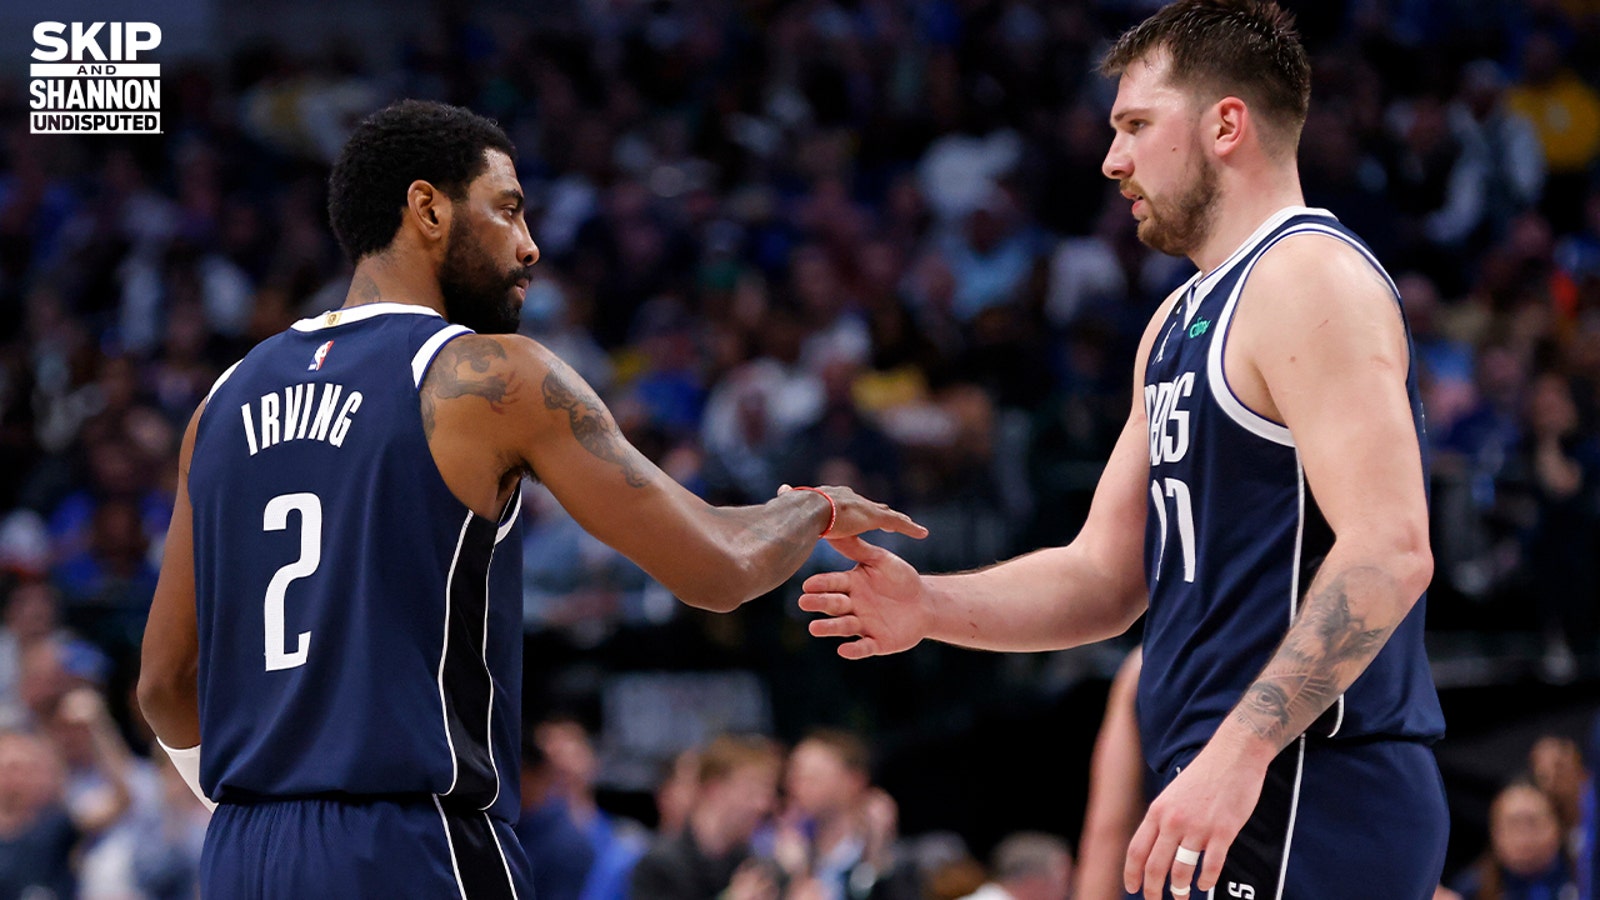 Mavericks fall to 1-4 with Luka Dončić, Kyrie Irving after loss vs. Pacers